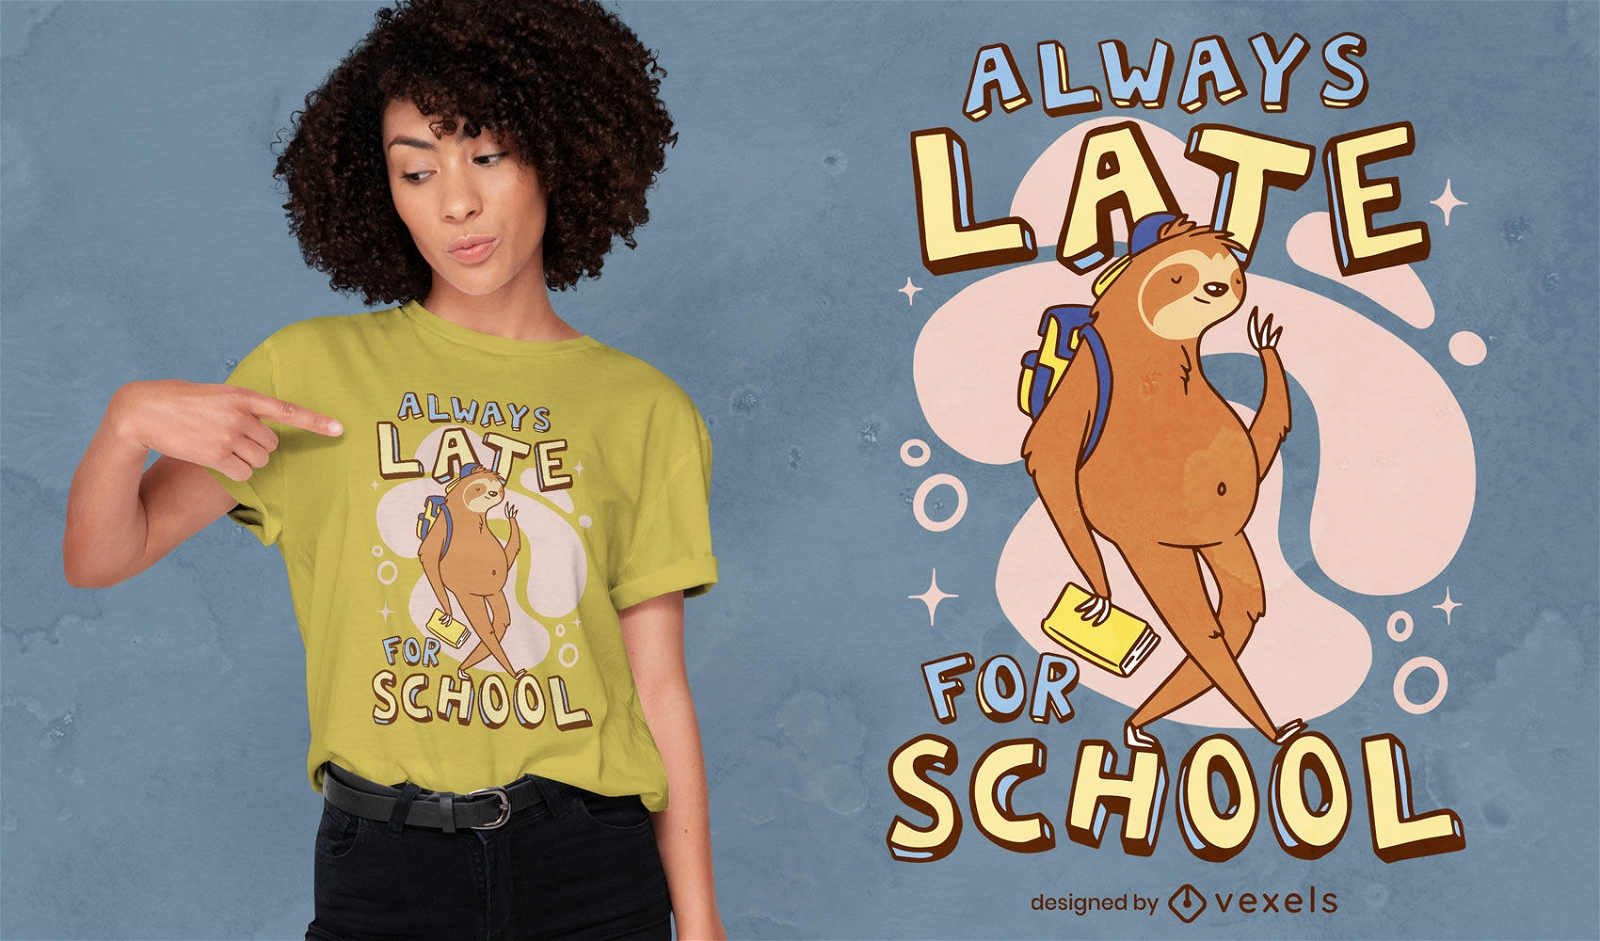 Sloth always late quote t-shirt design